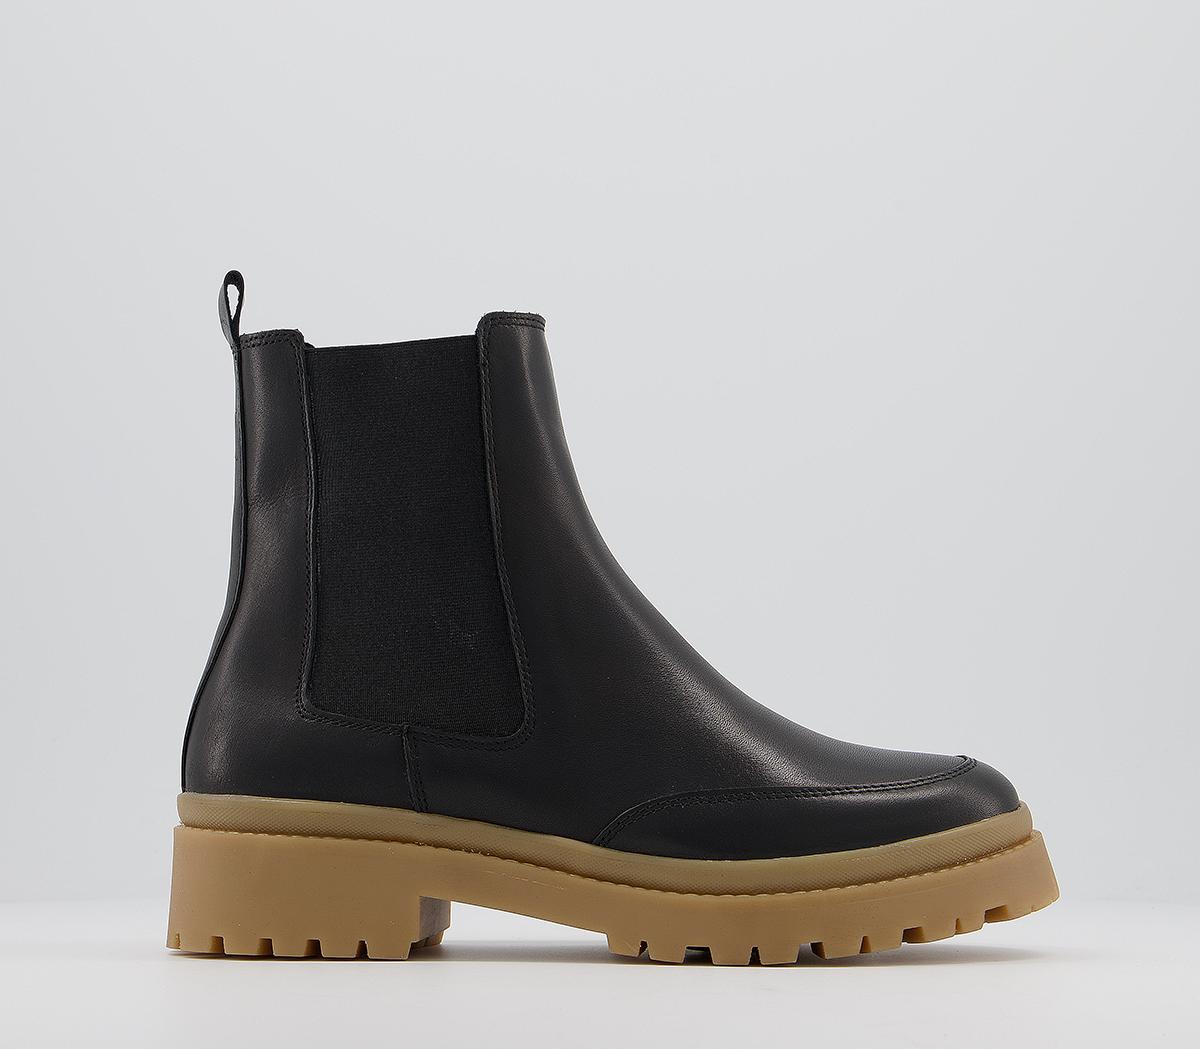 Office Amuse Contrast Sole Chelsea Boots Black Leather With Brown Sole ...